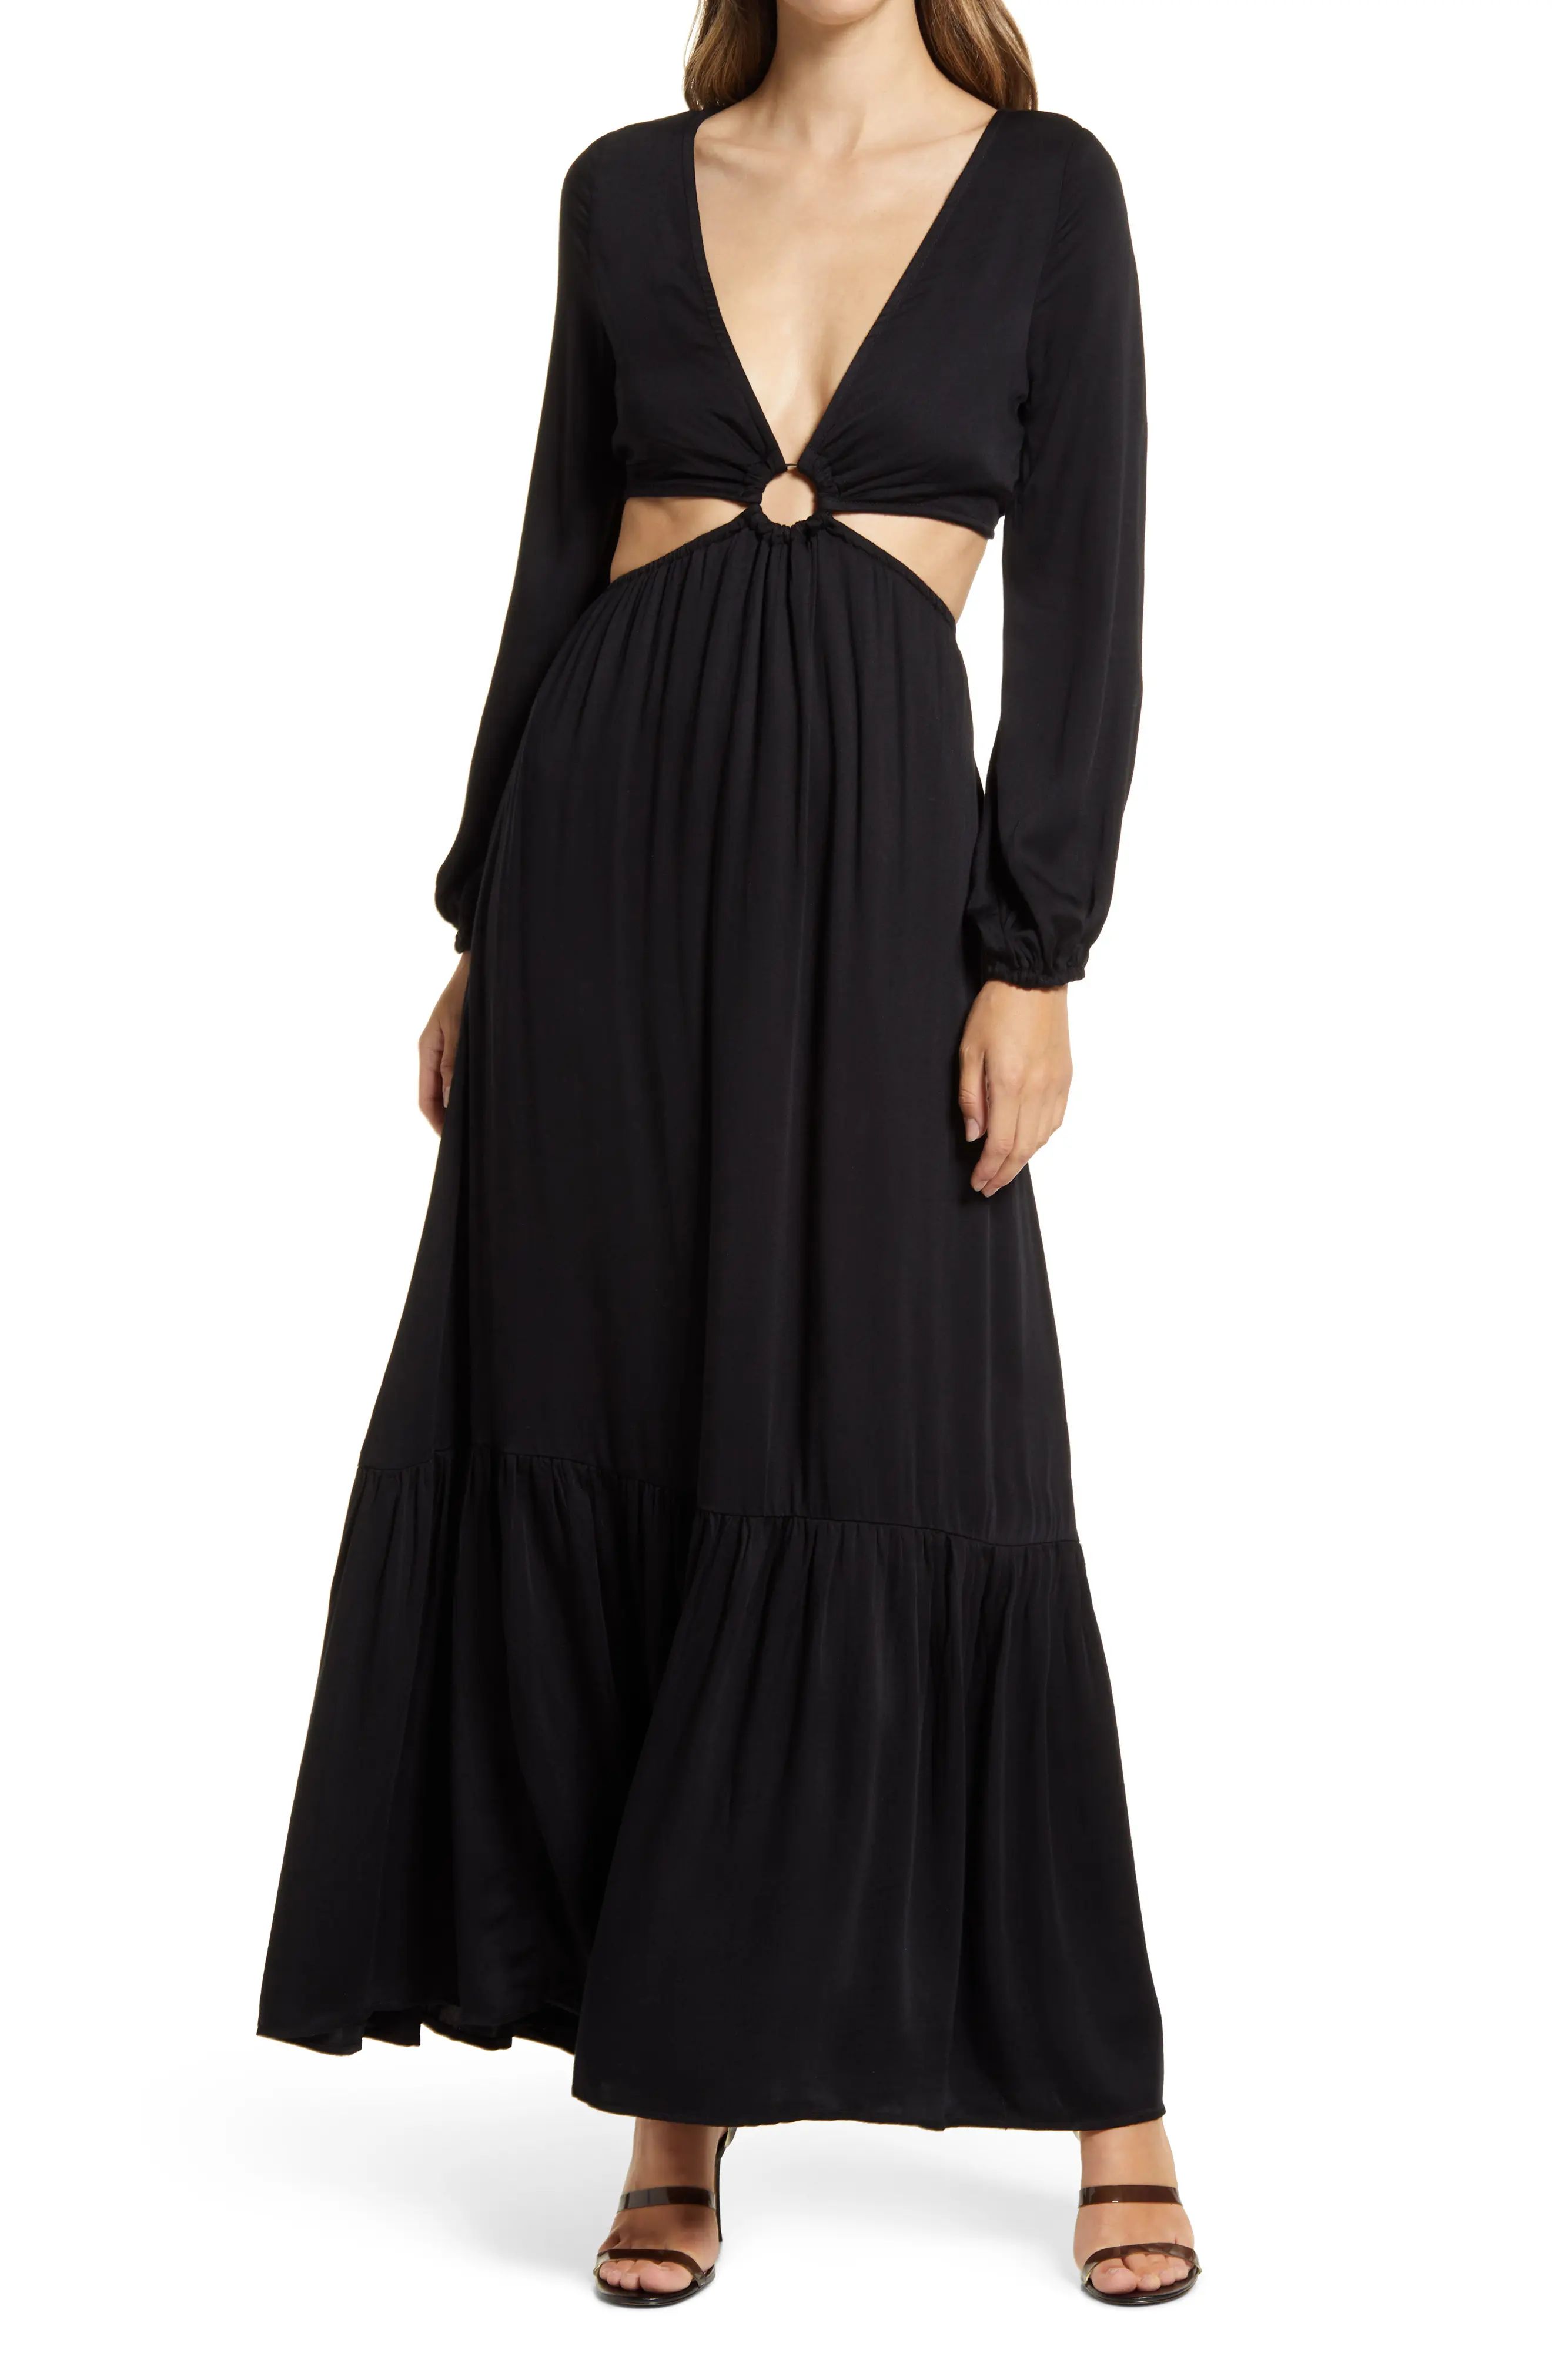 BTFL-life Plunge Neck Cutout Waist Long Sleeve Maxi Dress, Size Small in Black at Nordstrom | Nordstrom